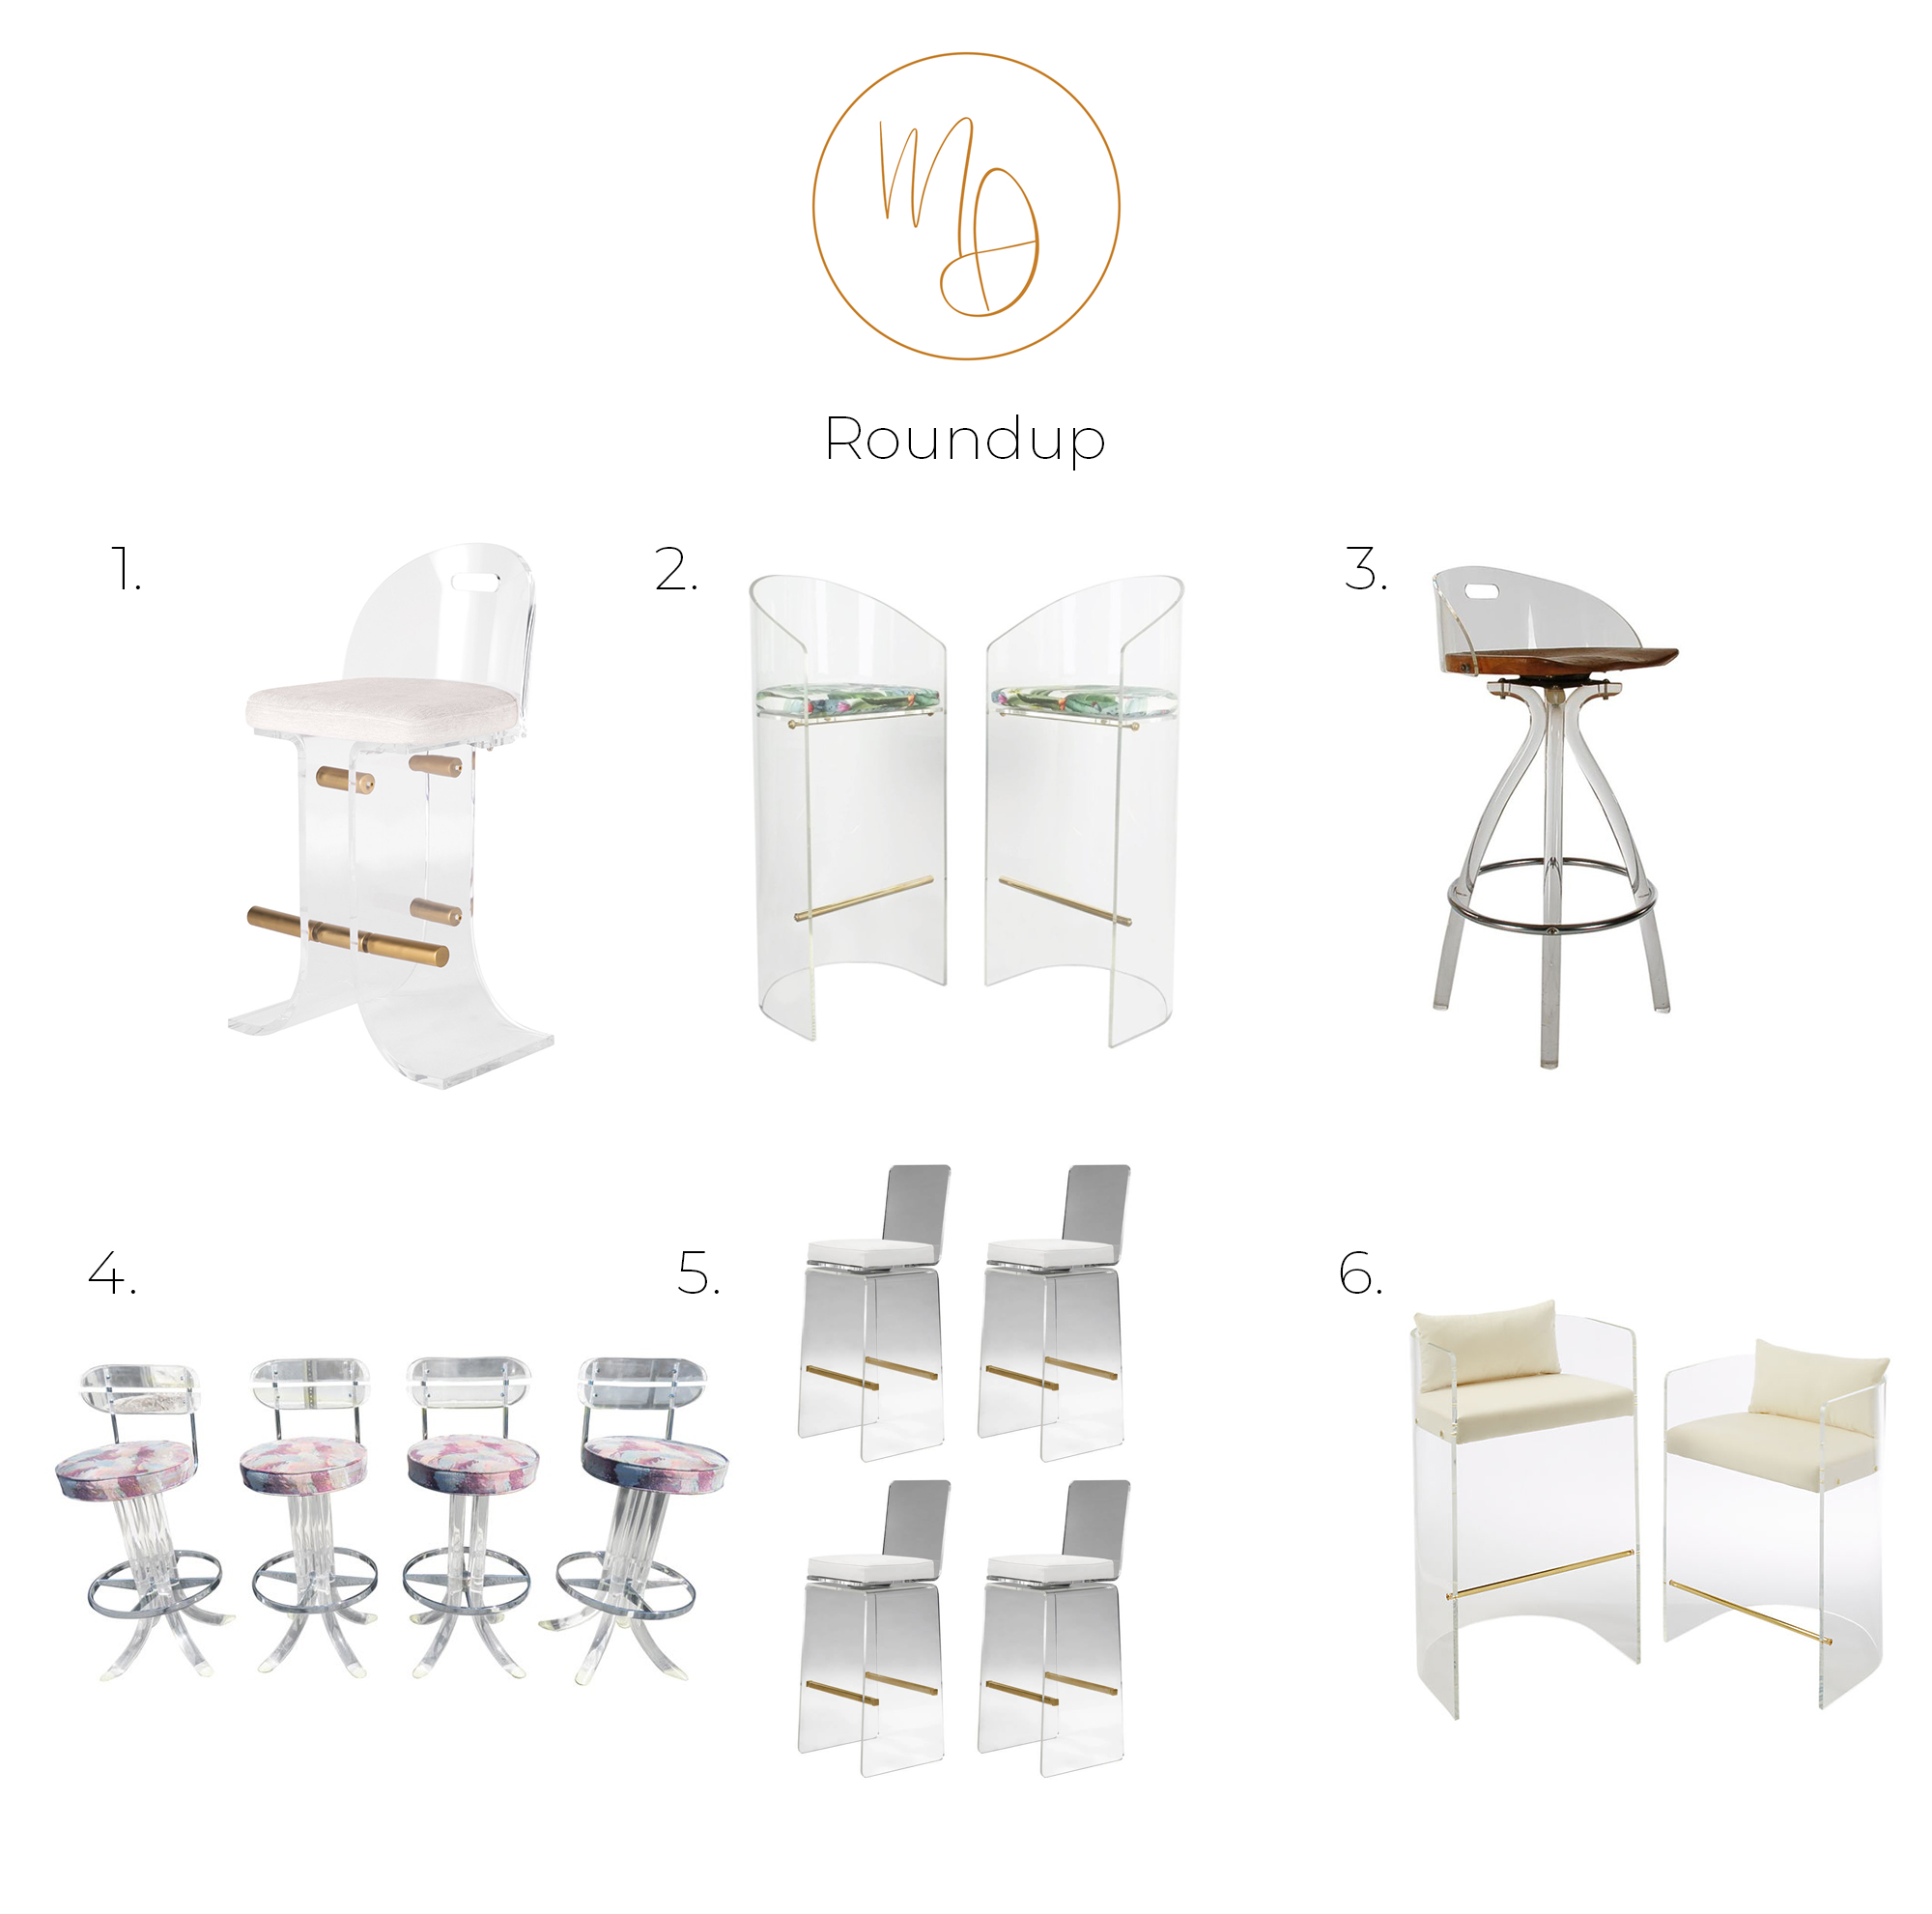 Murphy Deesign Lucite And Wood Stool Roundup